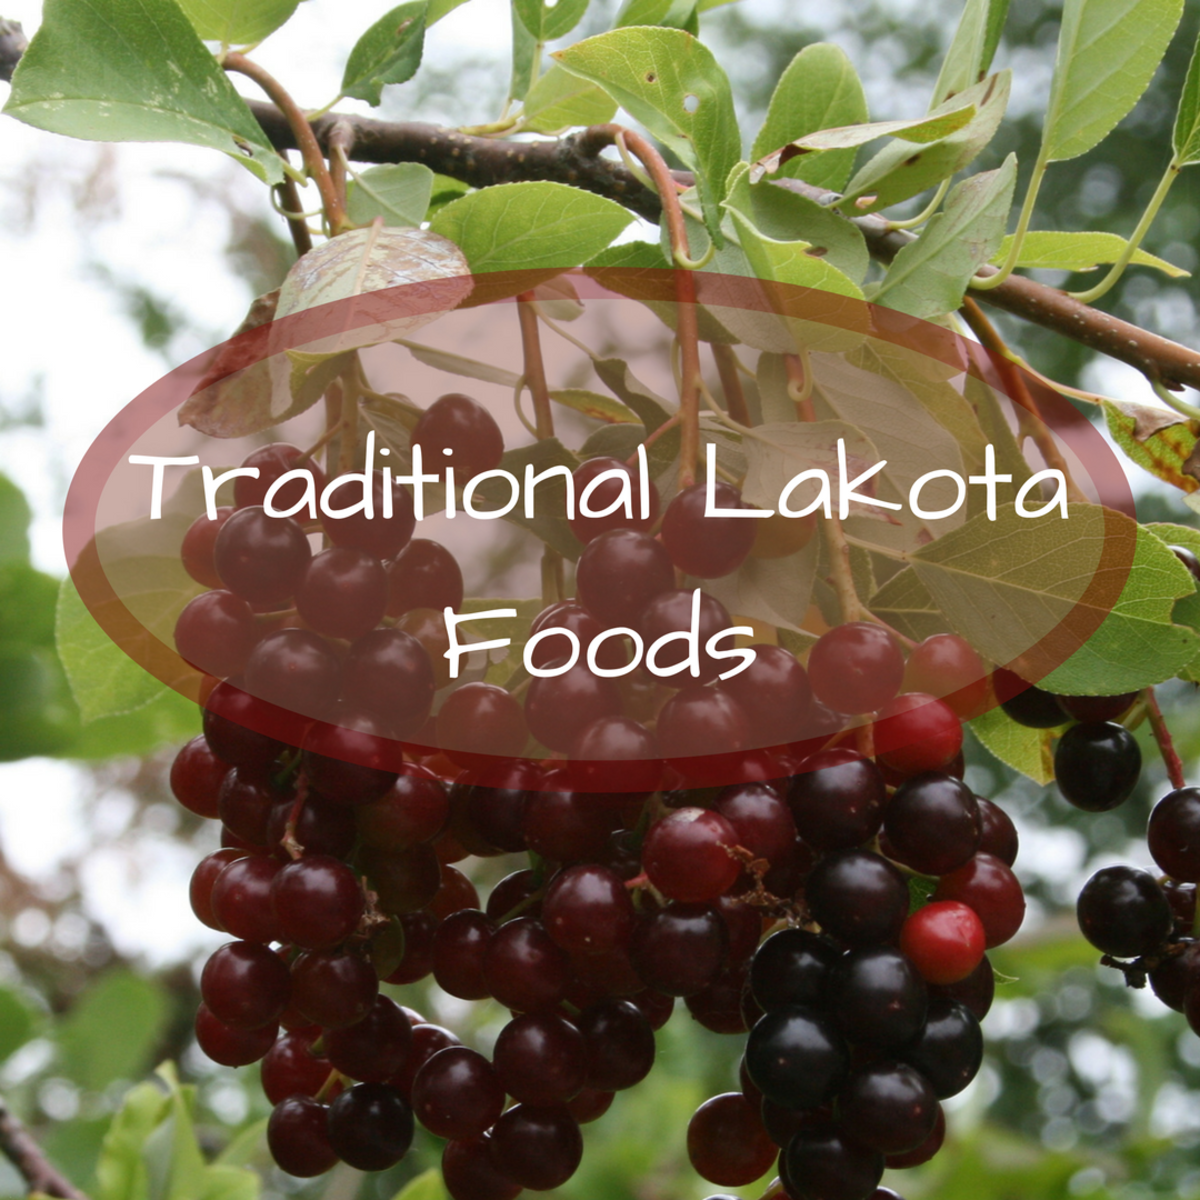 There are many stories and ceremonies surrounding traditional Lakota foods. 